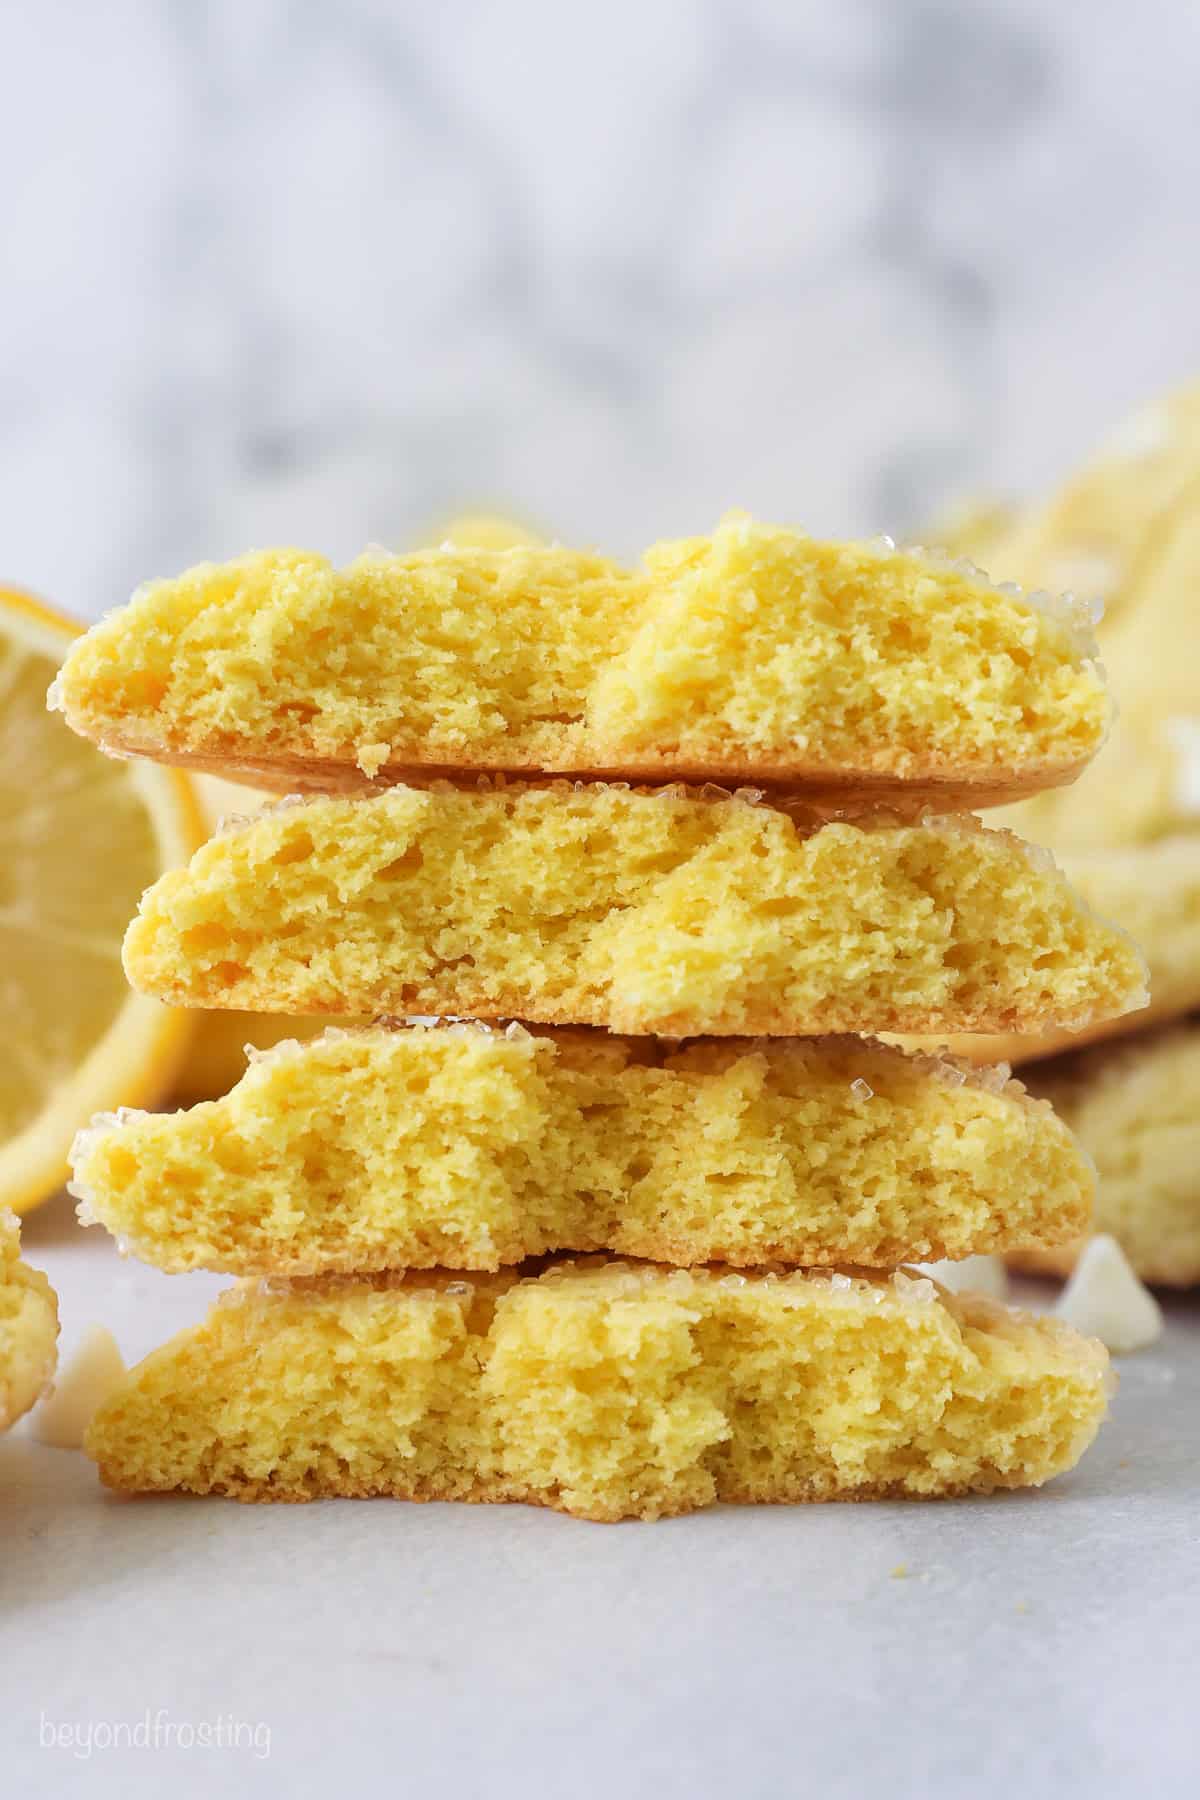 Side view of a stack of lemon cookie halves.